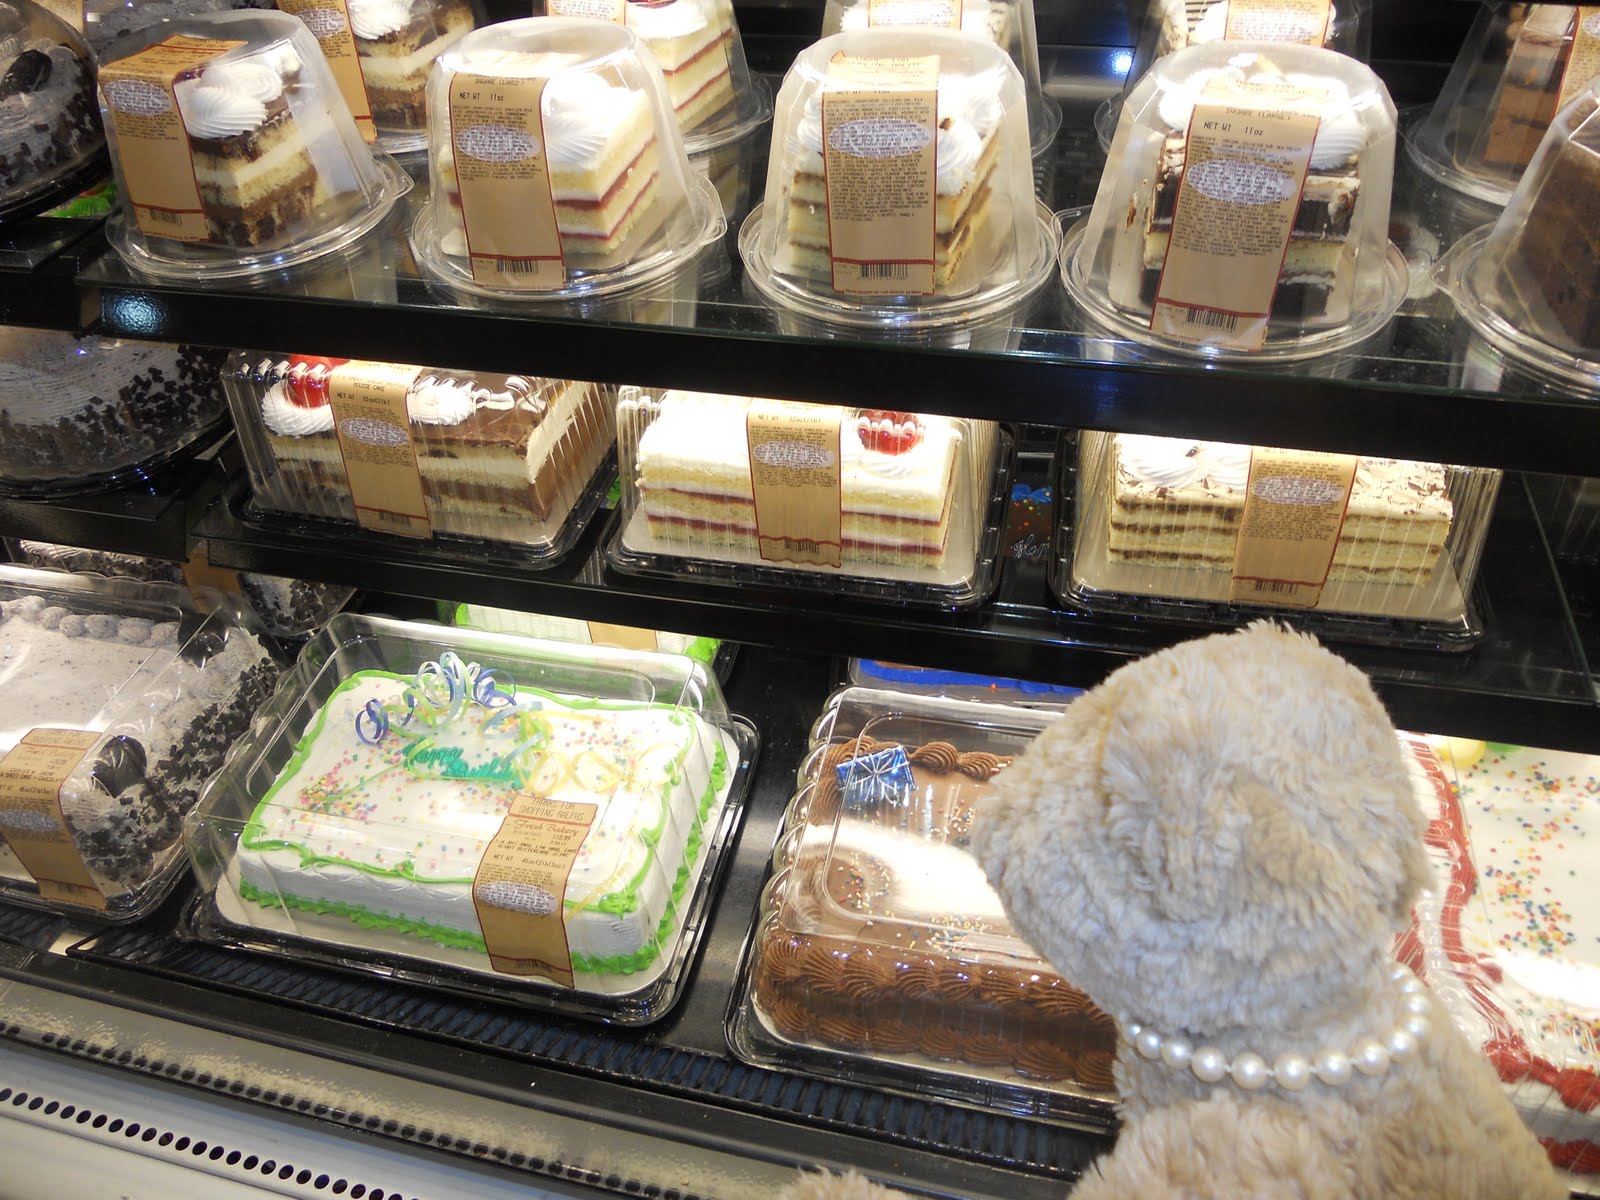 Ralphs Grocery Store Cakes